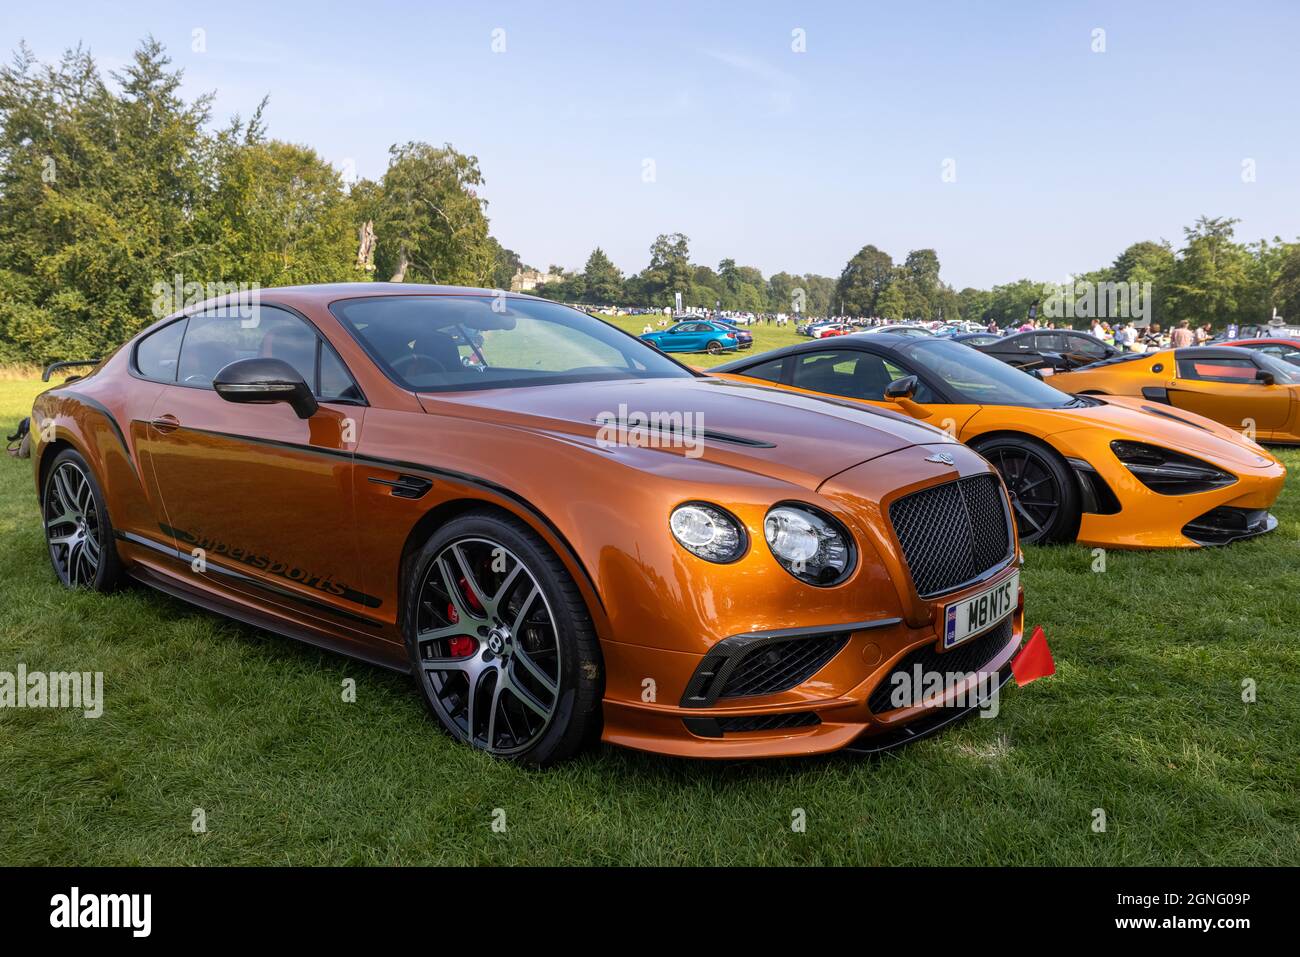 Bentley Continental Supersports ‘M8 NTS’  at the Salon Privé motor show held at Blenheim Palace on the 5th September 2021 Stock Photo